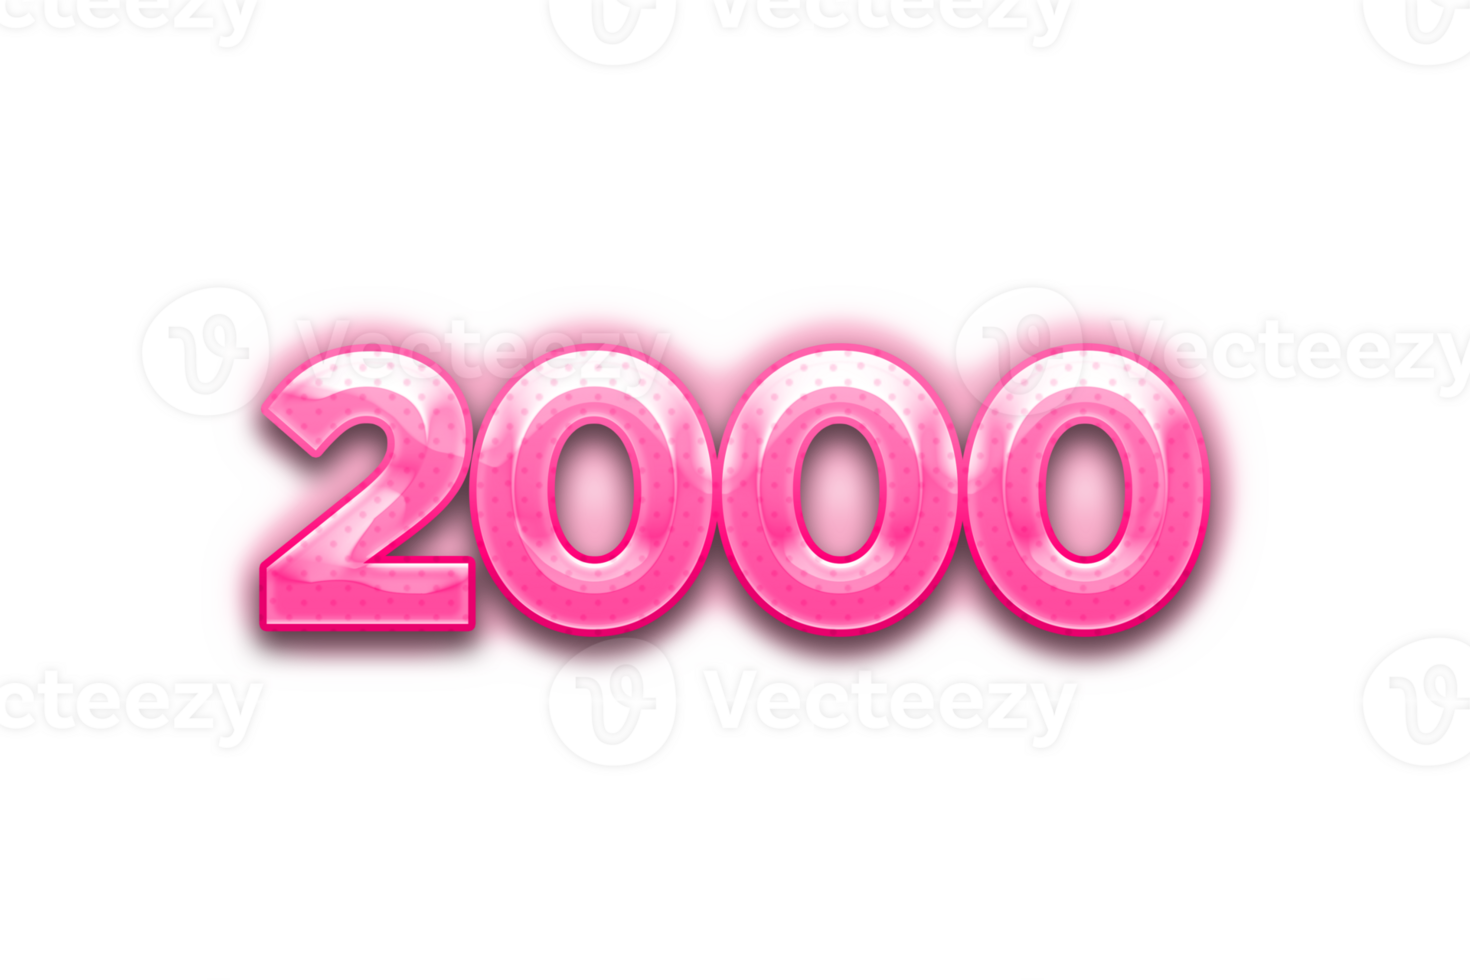 2000 subscribers celebration greeting Number with pink design png